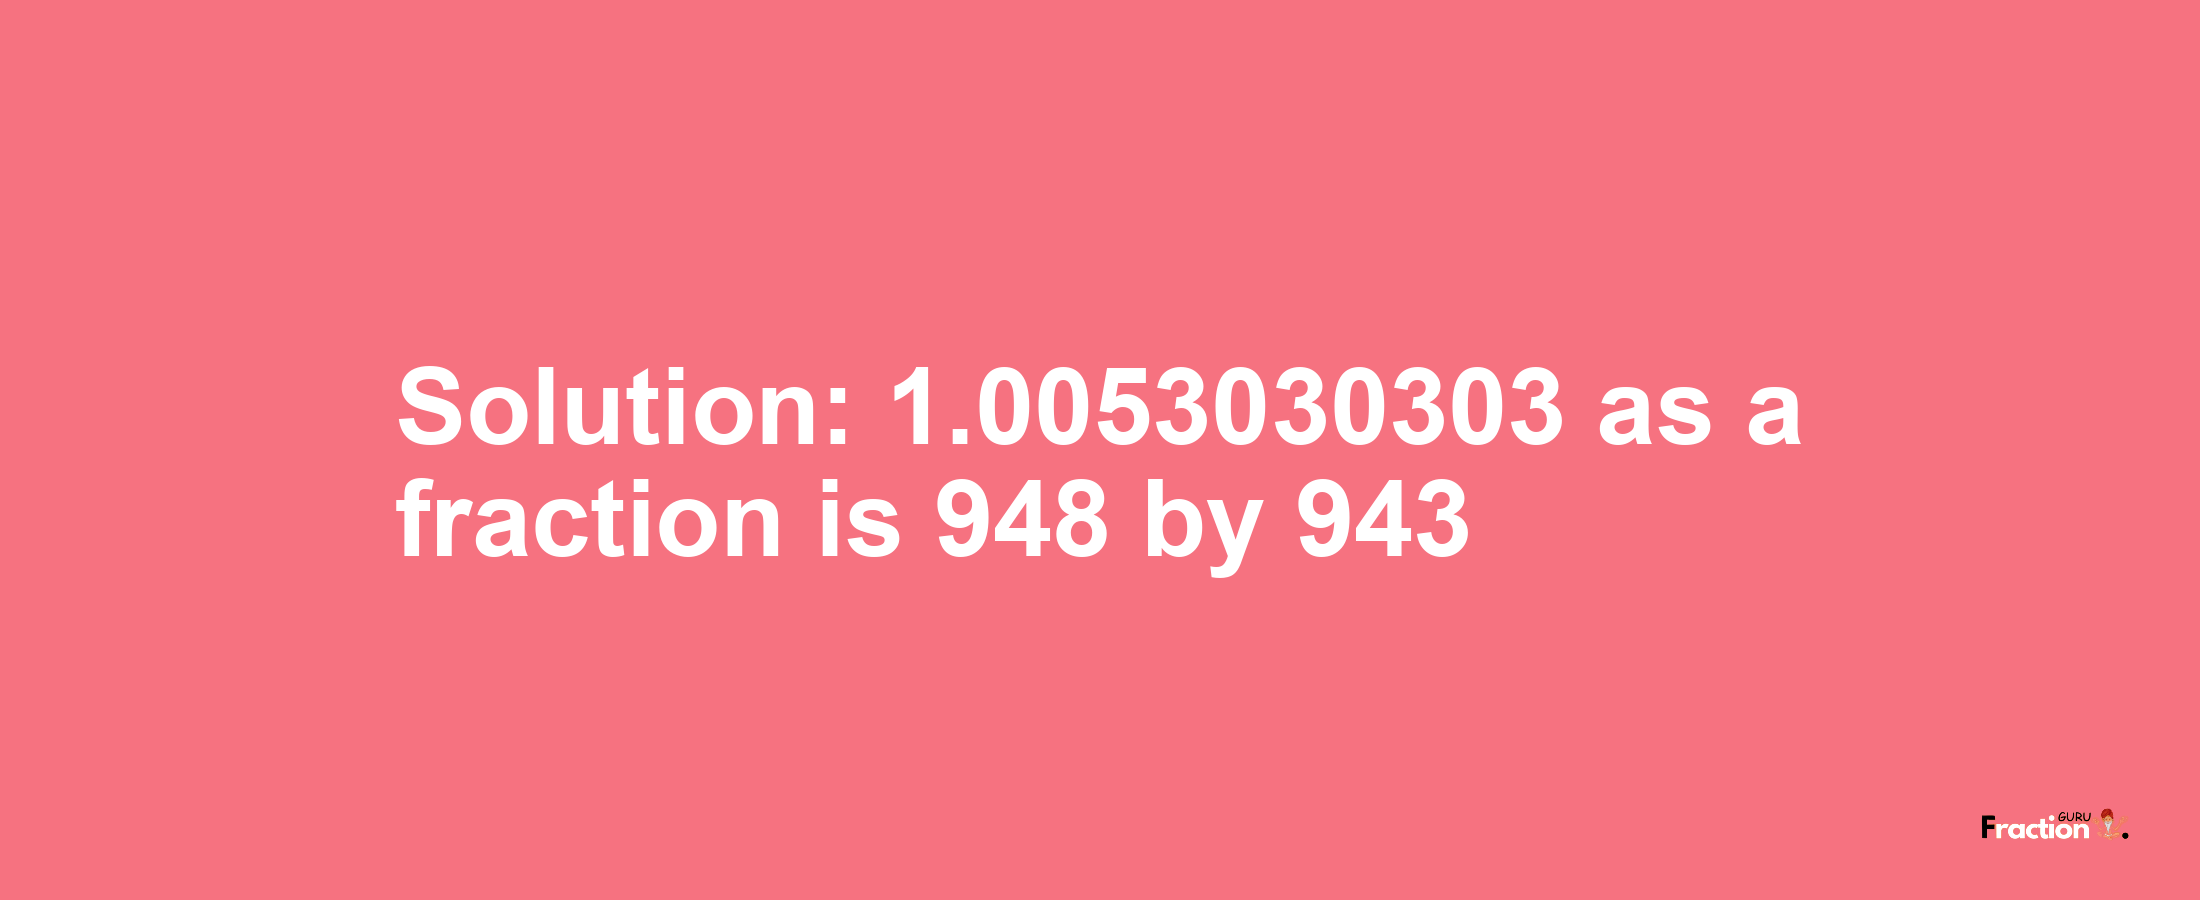 Solution:1.0053030303 as a fraction is 948/943